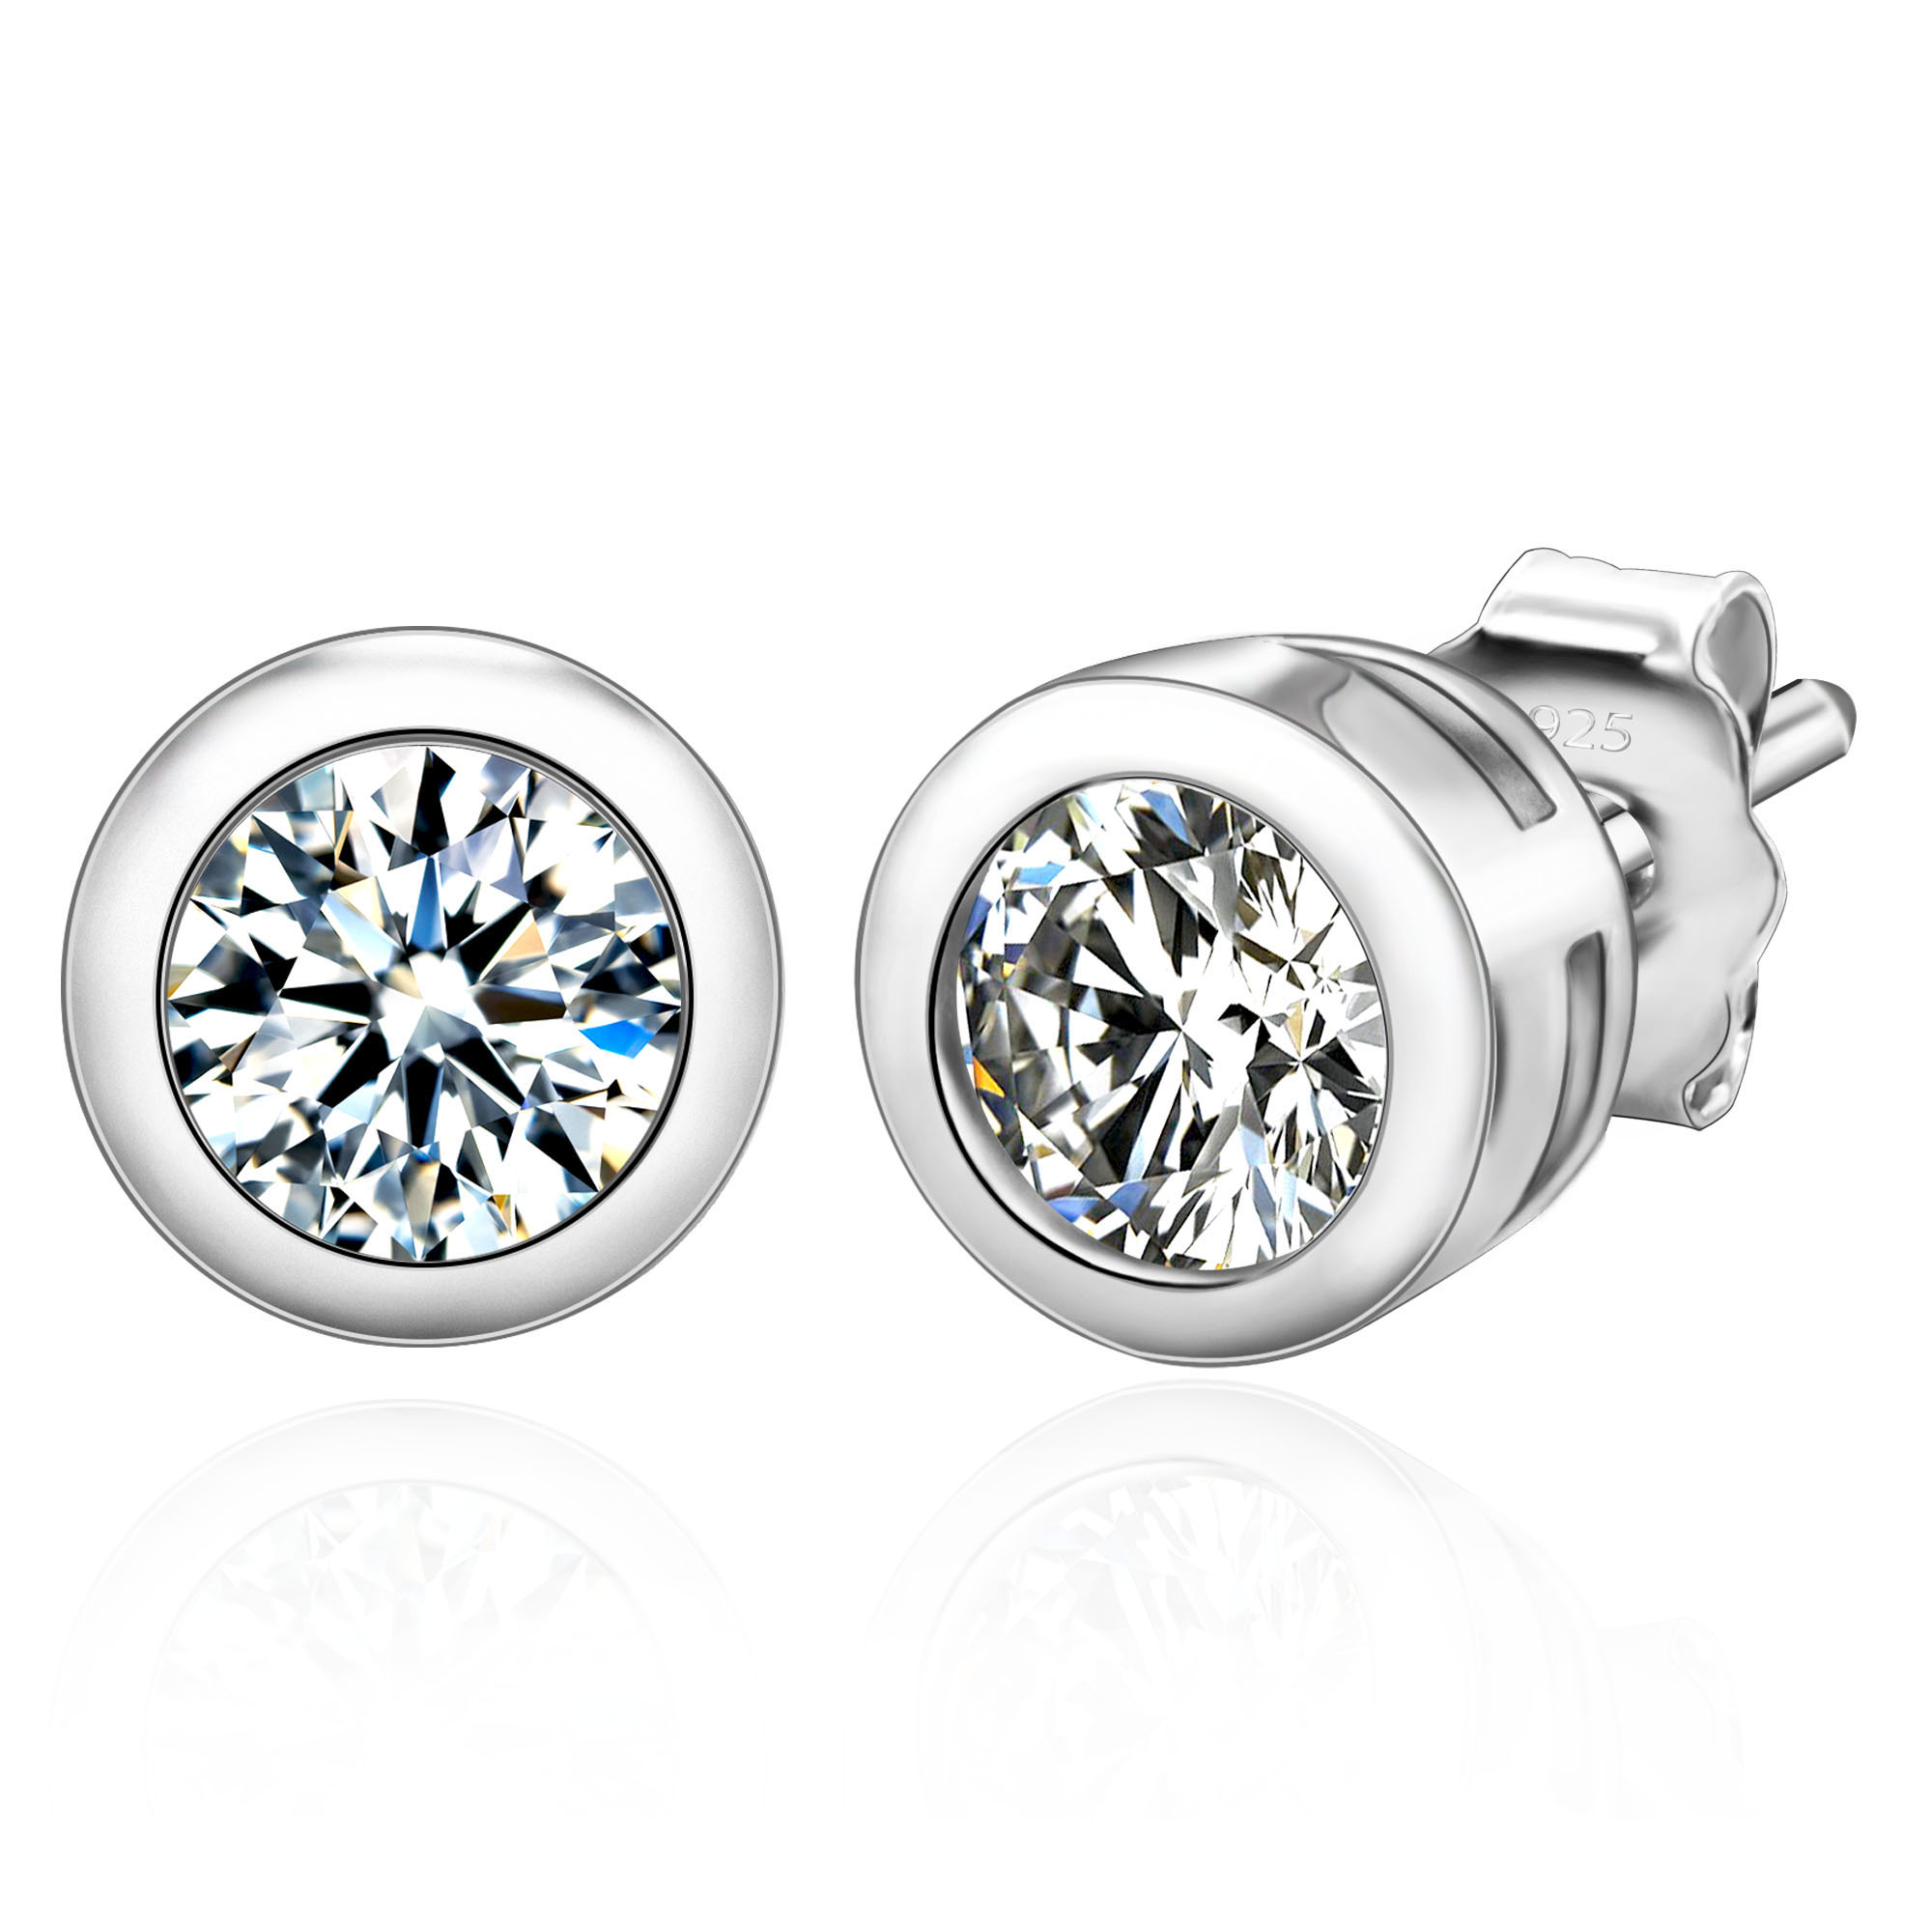 Essentials Gold or Rhodium Plated Sterling Silver AAA Cubic Zirconia Bezel Stud Earrings